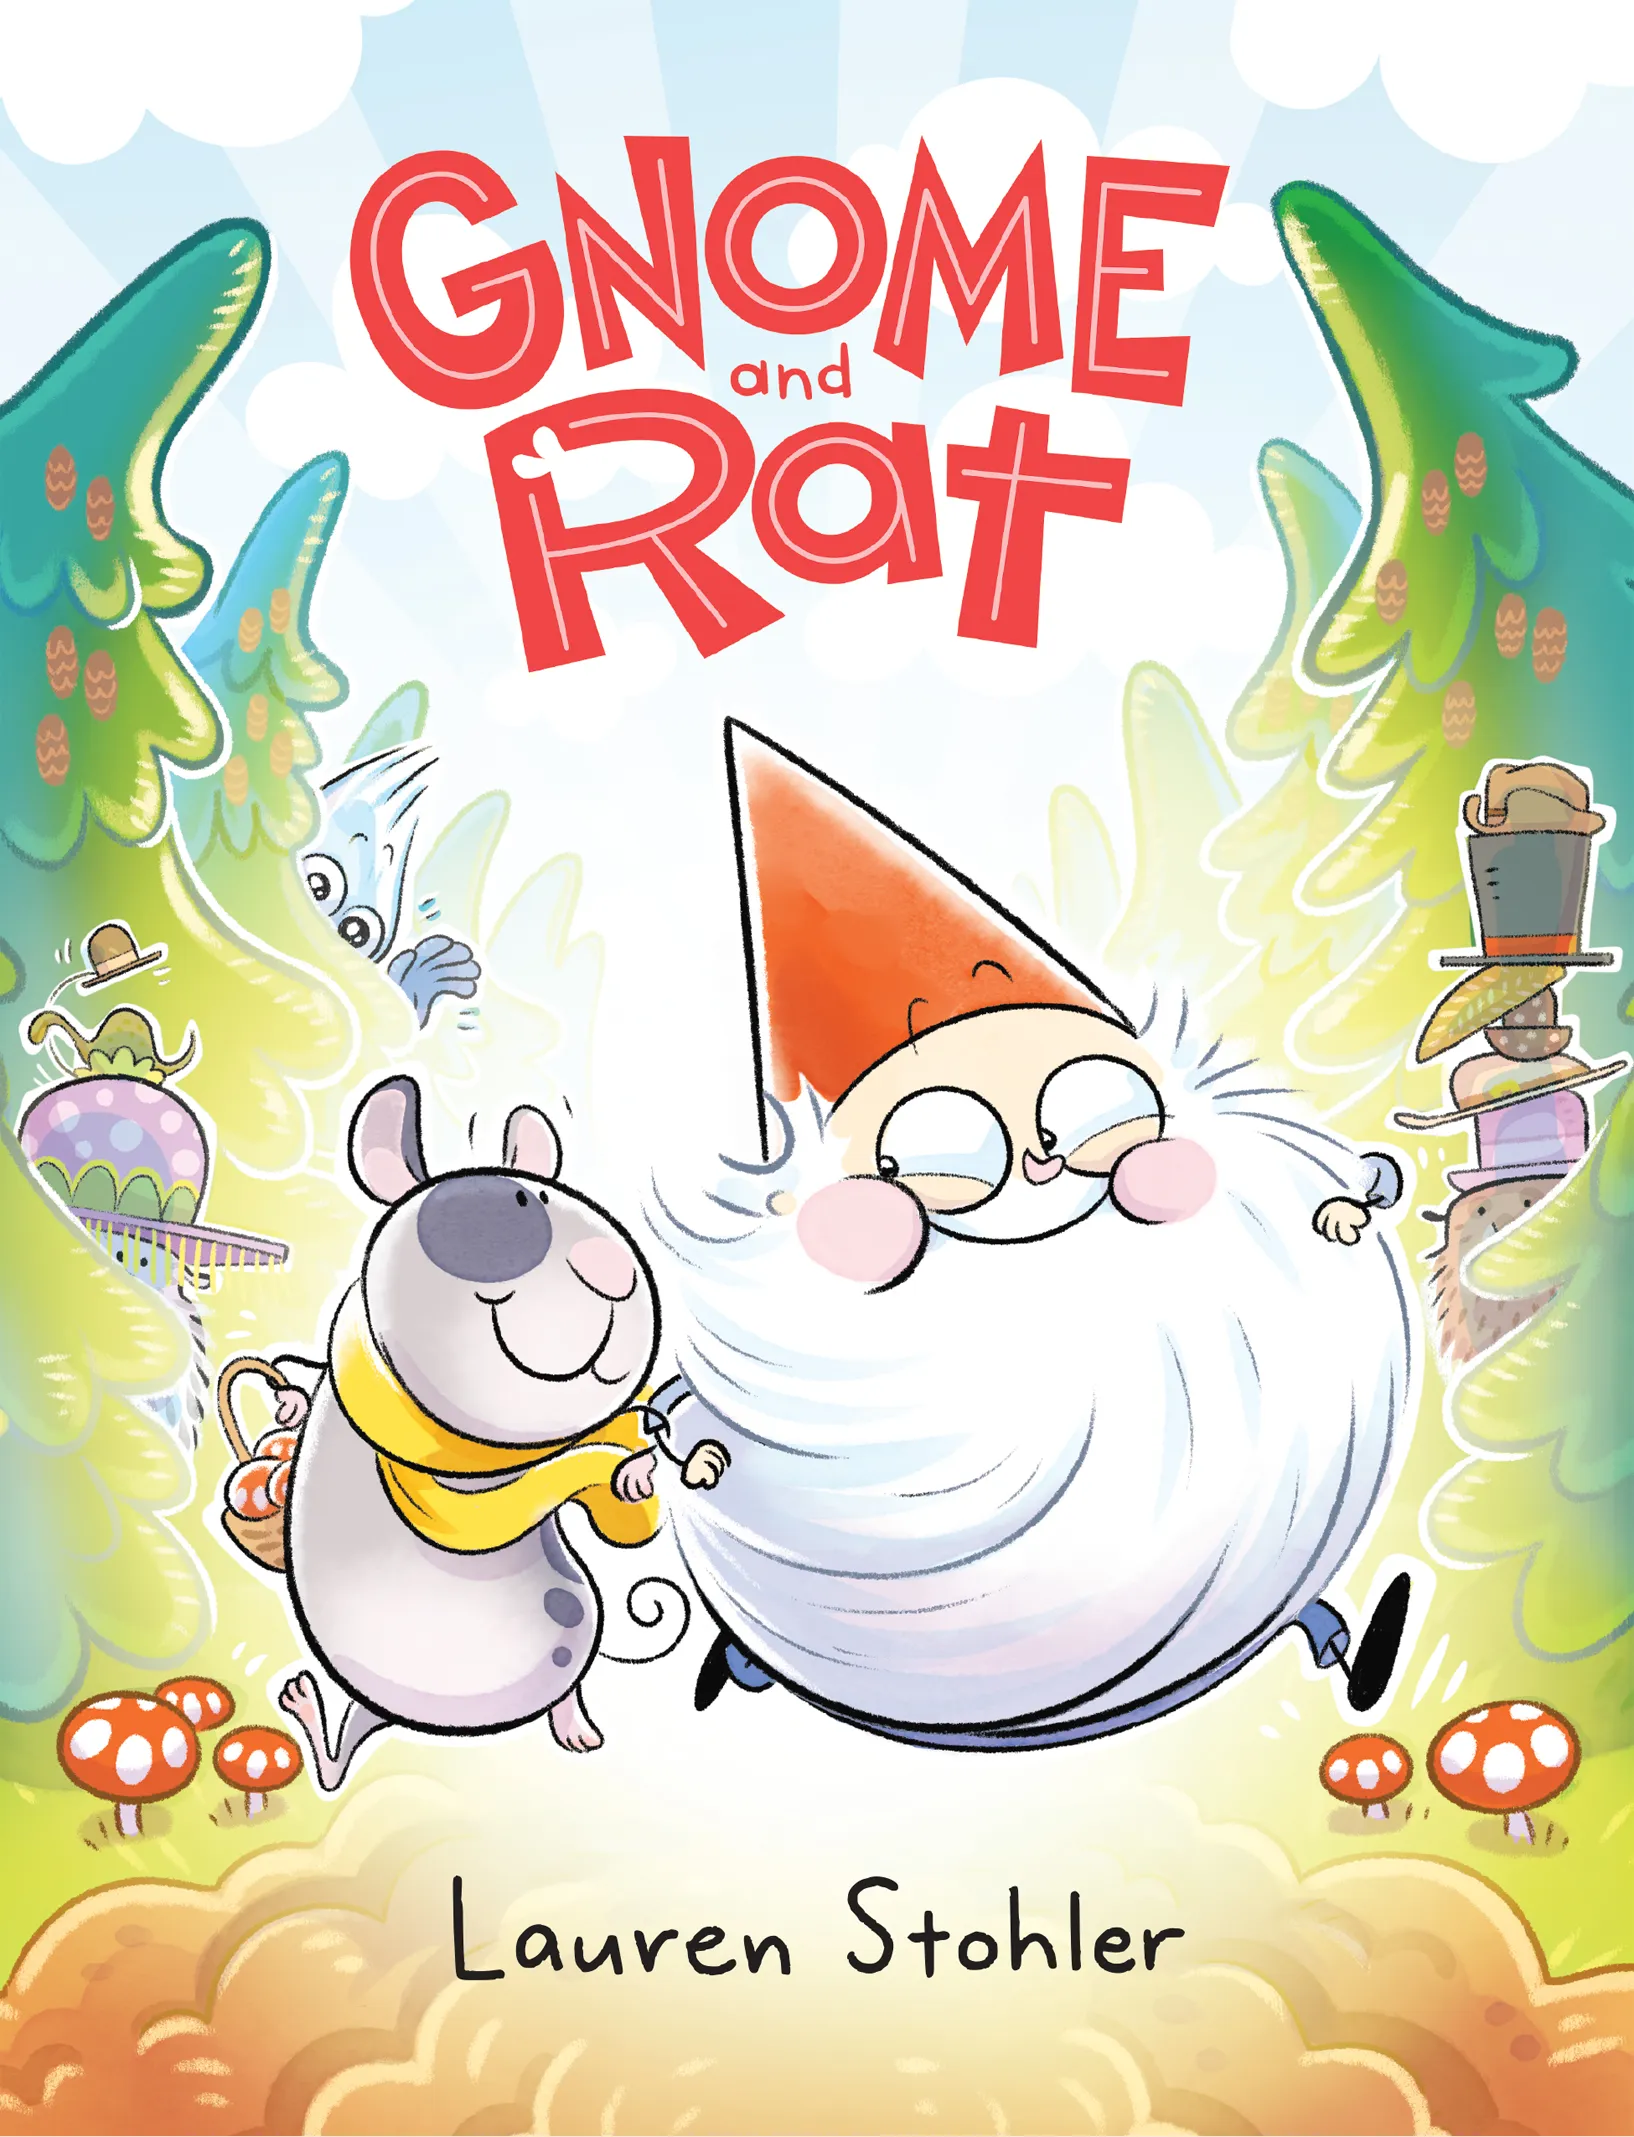 Gnome and Rat (Gnome and Rat #1)